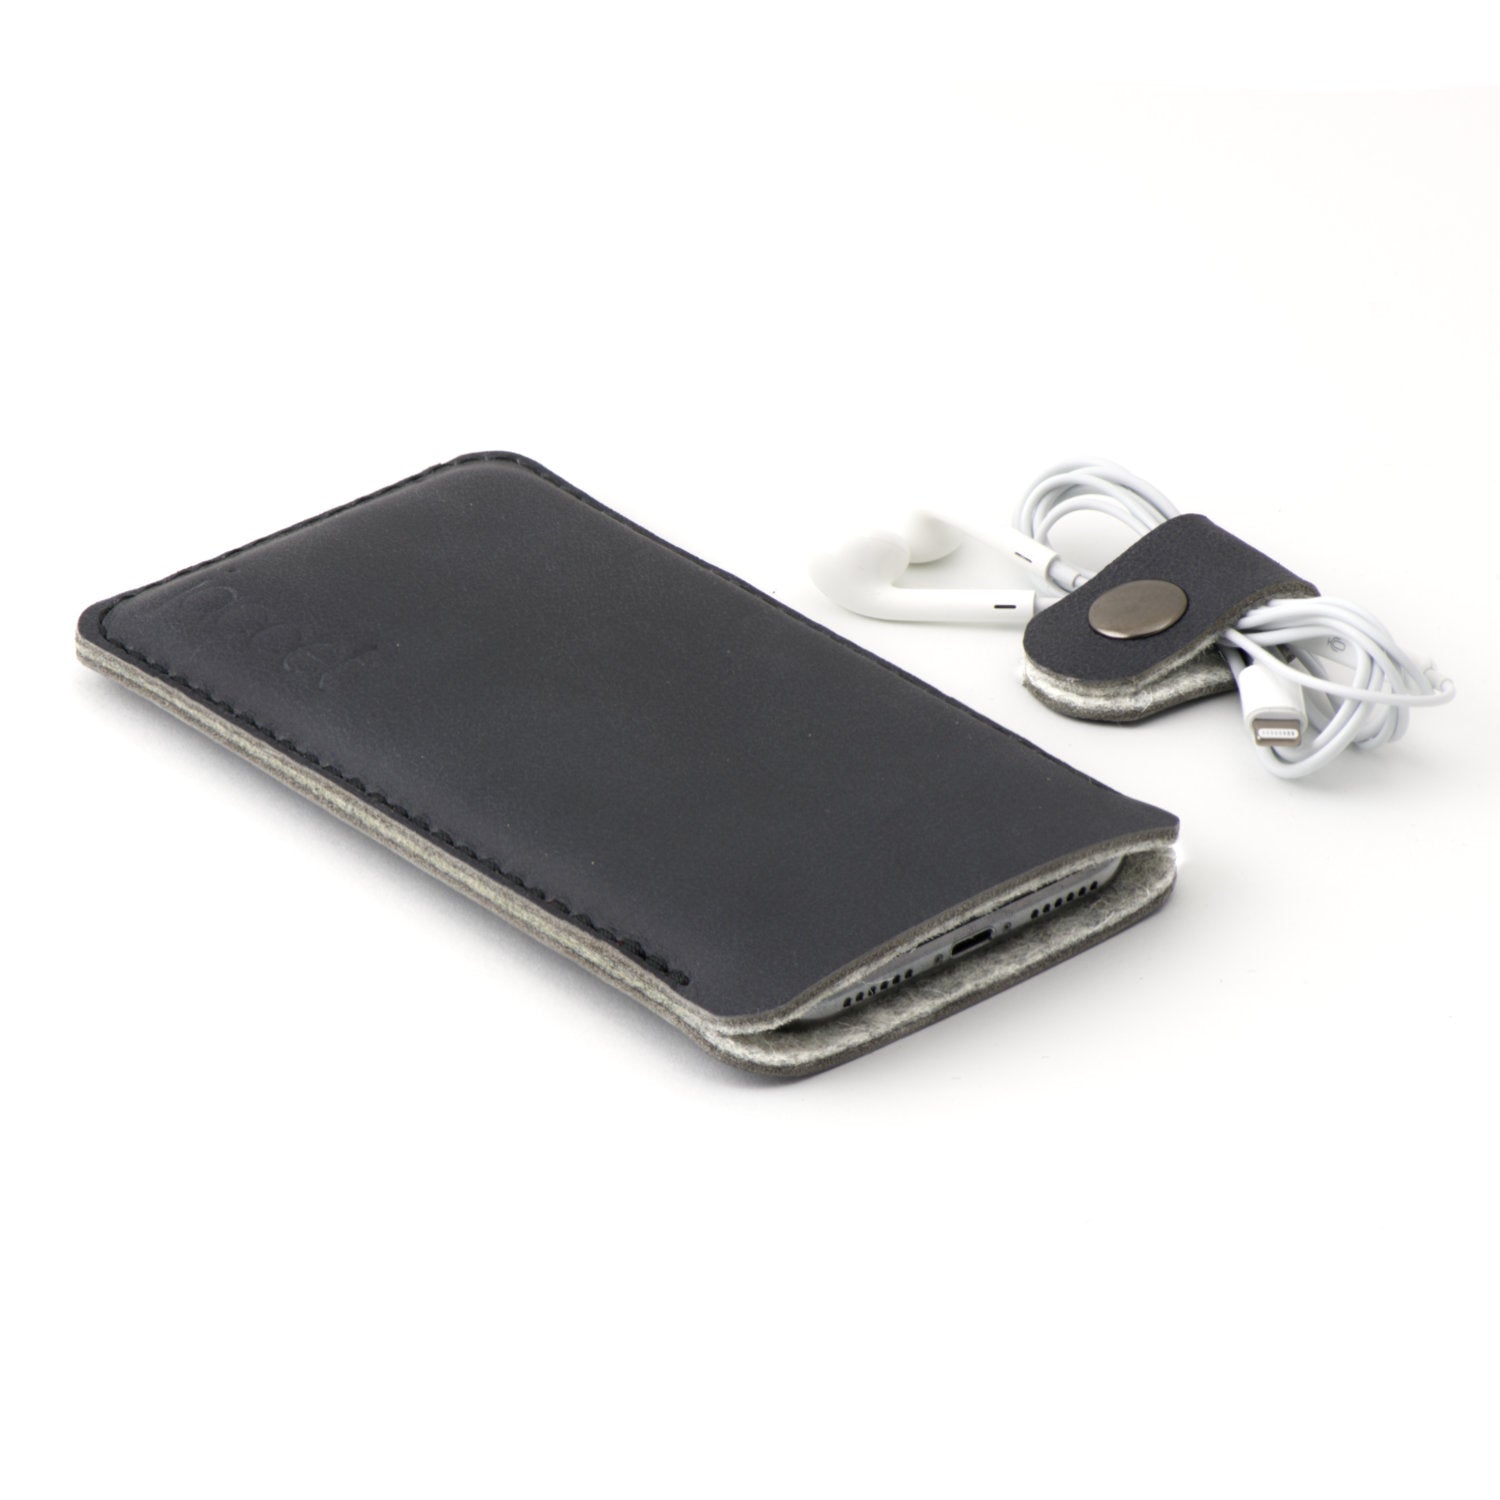 JACCET leather iPhone sleeve - anthracite/black leather with grey wool felt. 100% Handmade